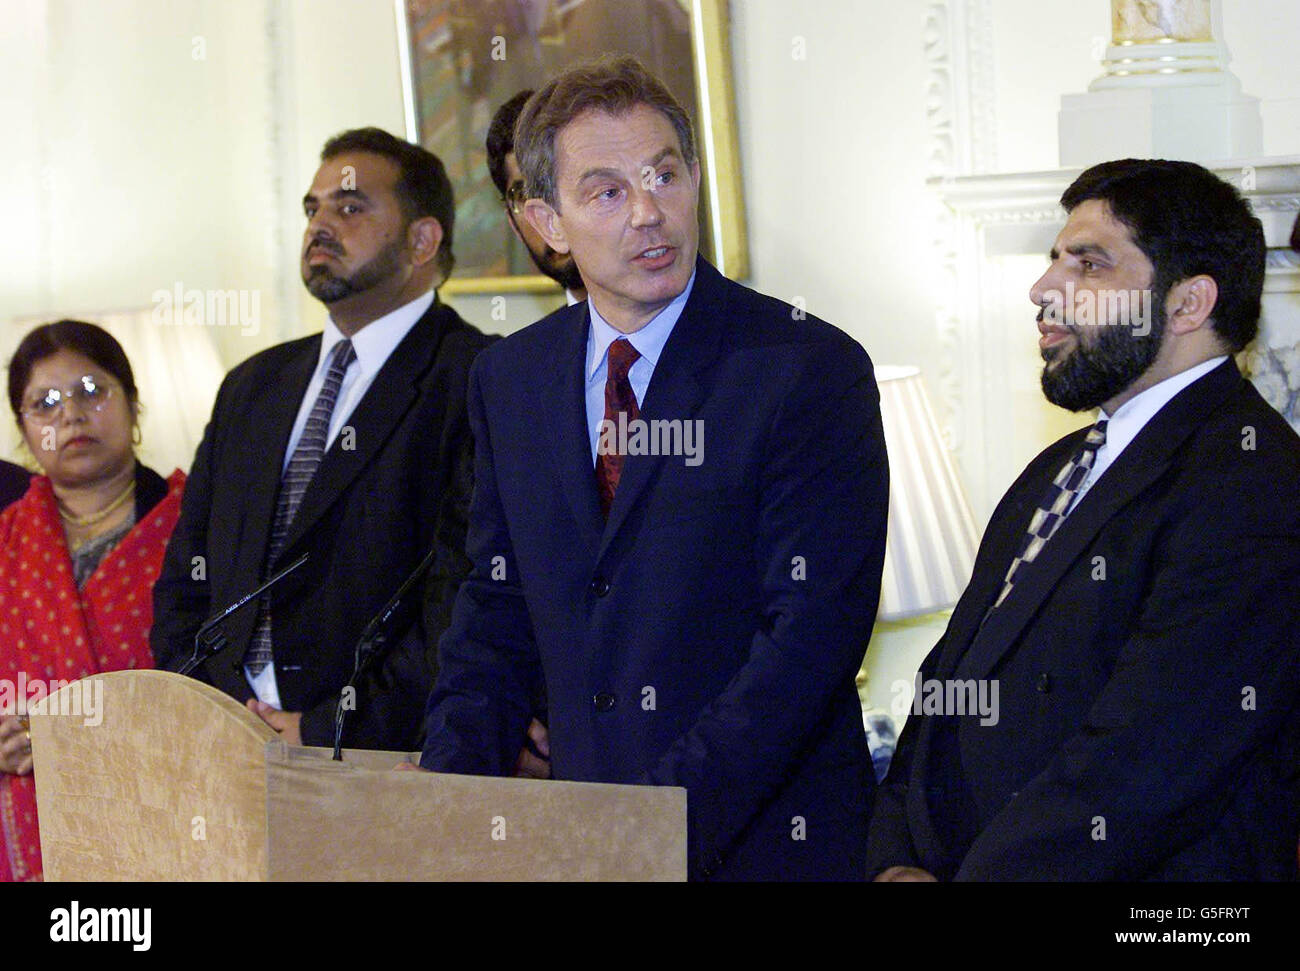 Prime Minister Tony Blair with with prominent British Muslim Community leaders in No. 10 Downing Street. The meeting was called after fears of escalating religious tensions following the terrorist attacks in New York and Washington. Stock Photo